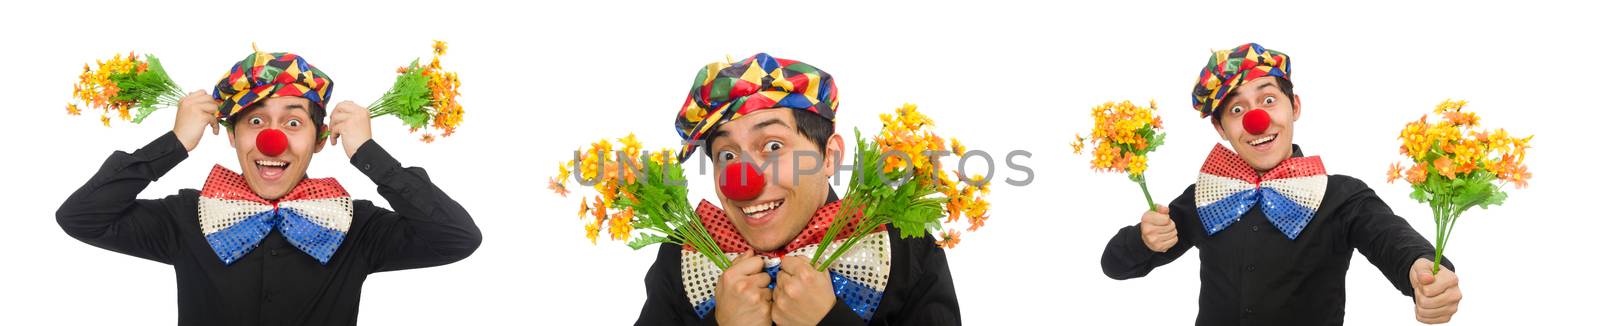 Funny clown with flowers isolated on white by Elnur